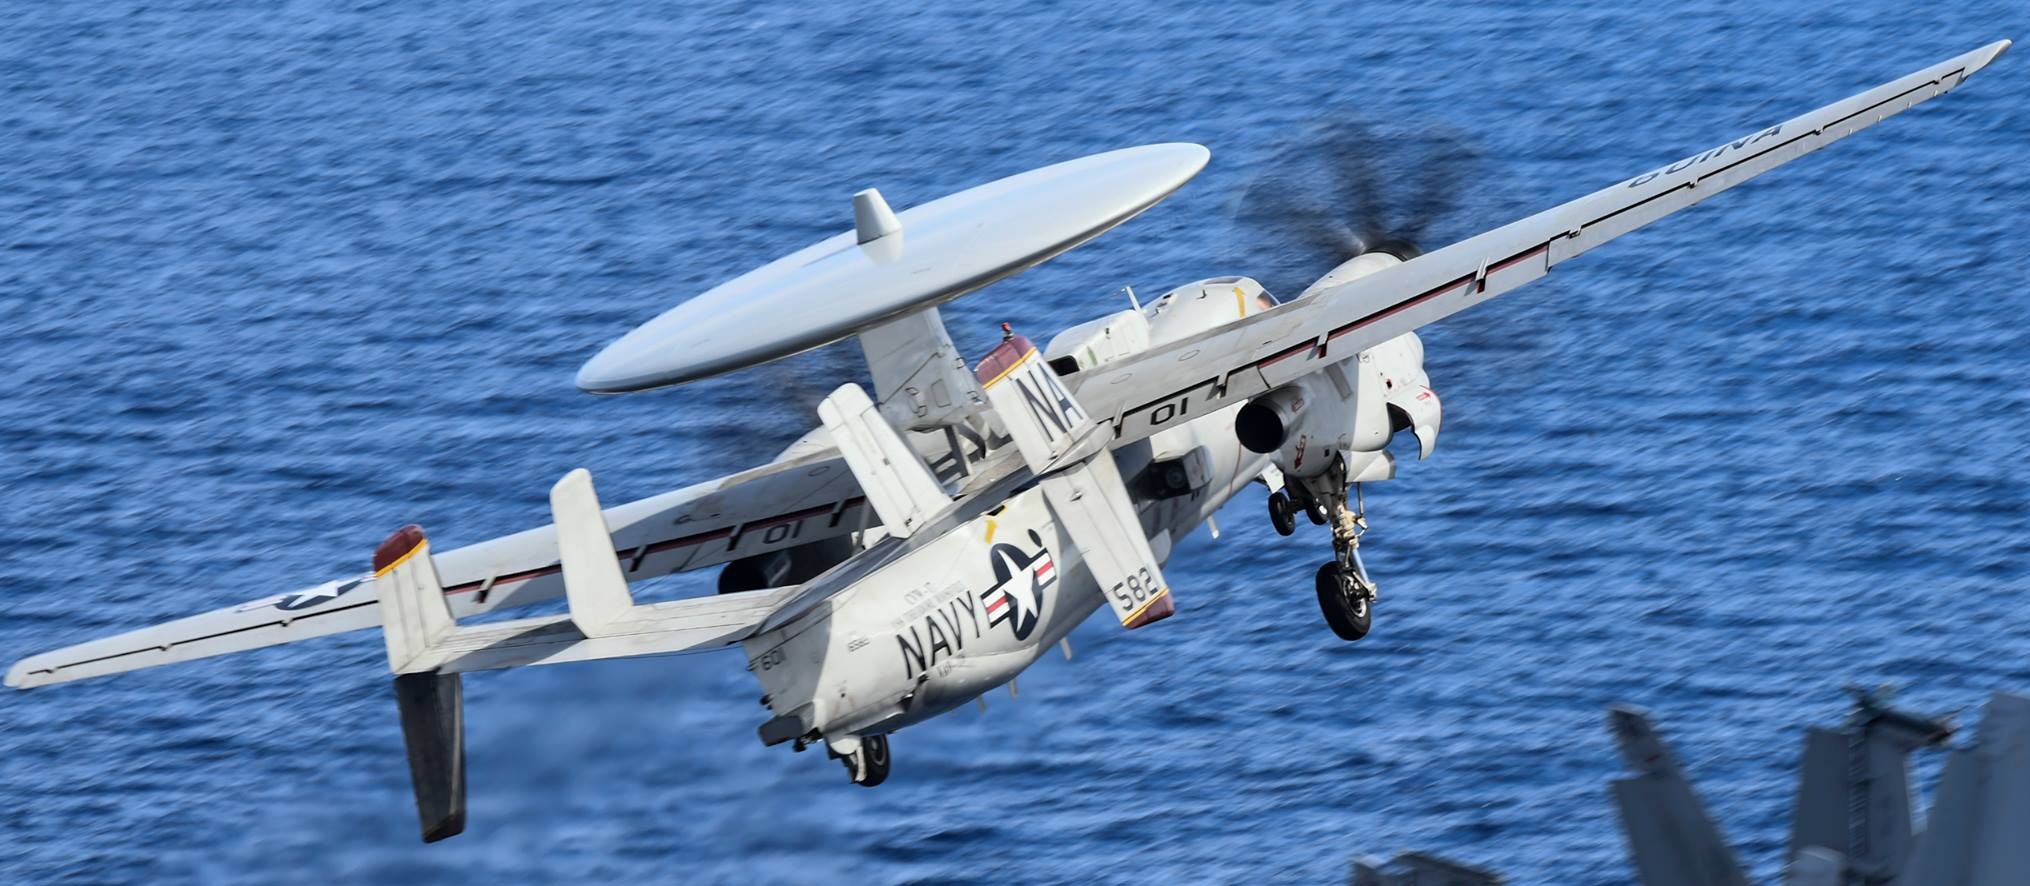 vaw-116 sun kings airborne command control squadron carrier early warning cvw-17 uss theodore roosevelt cvn-71 74